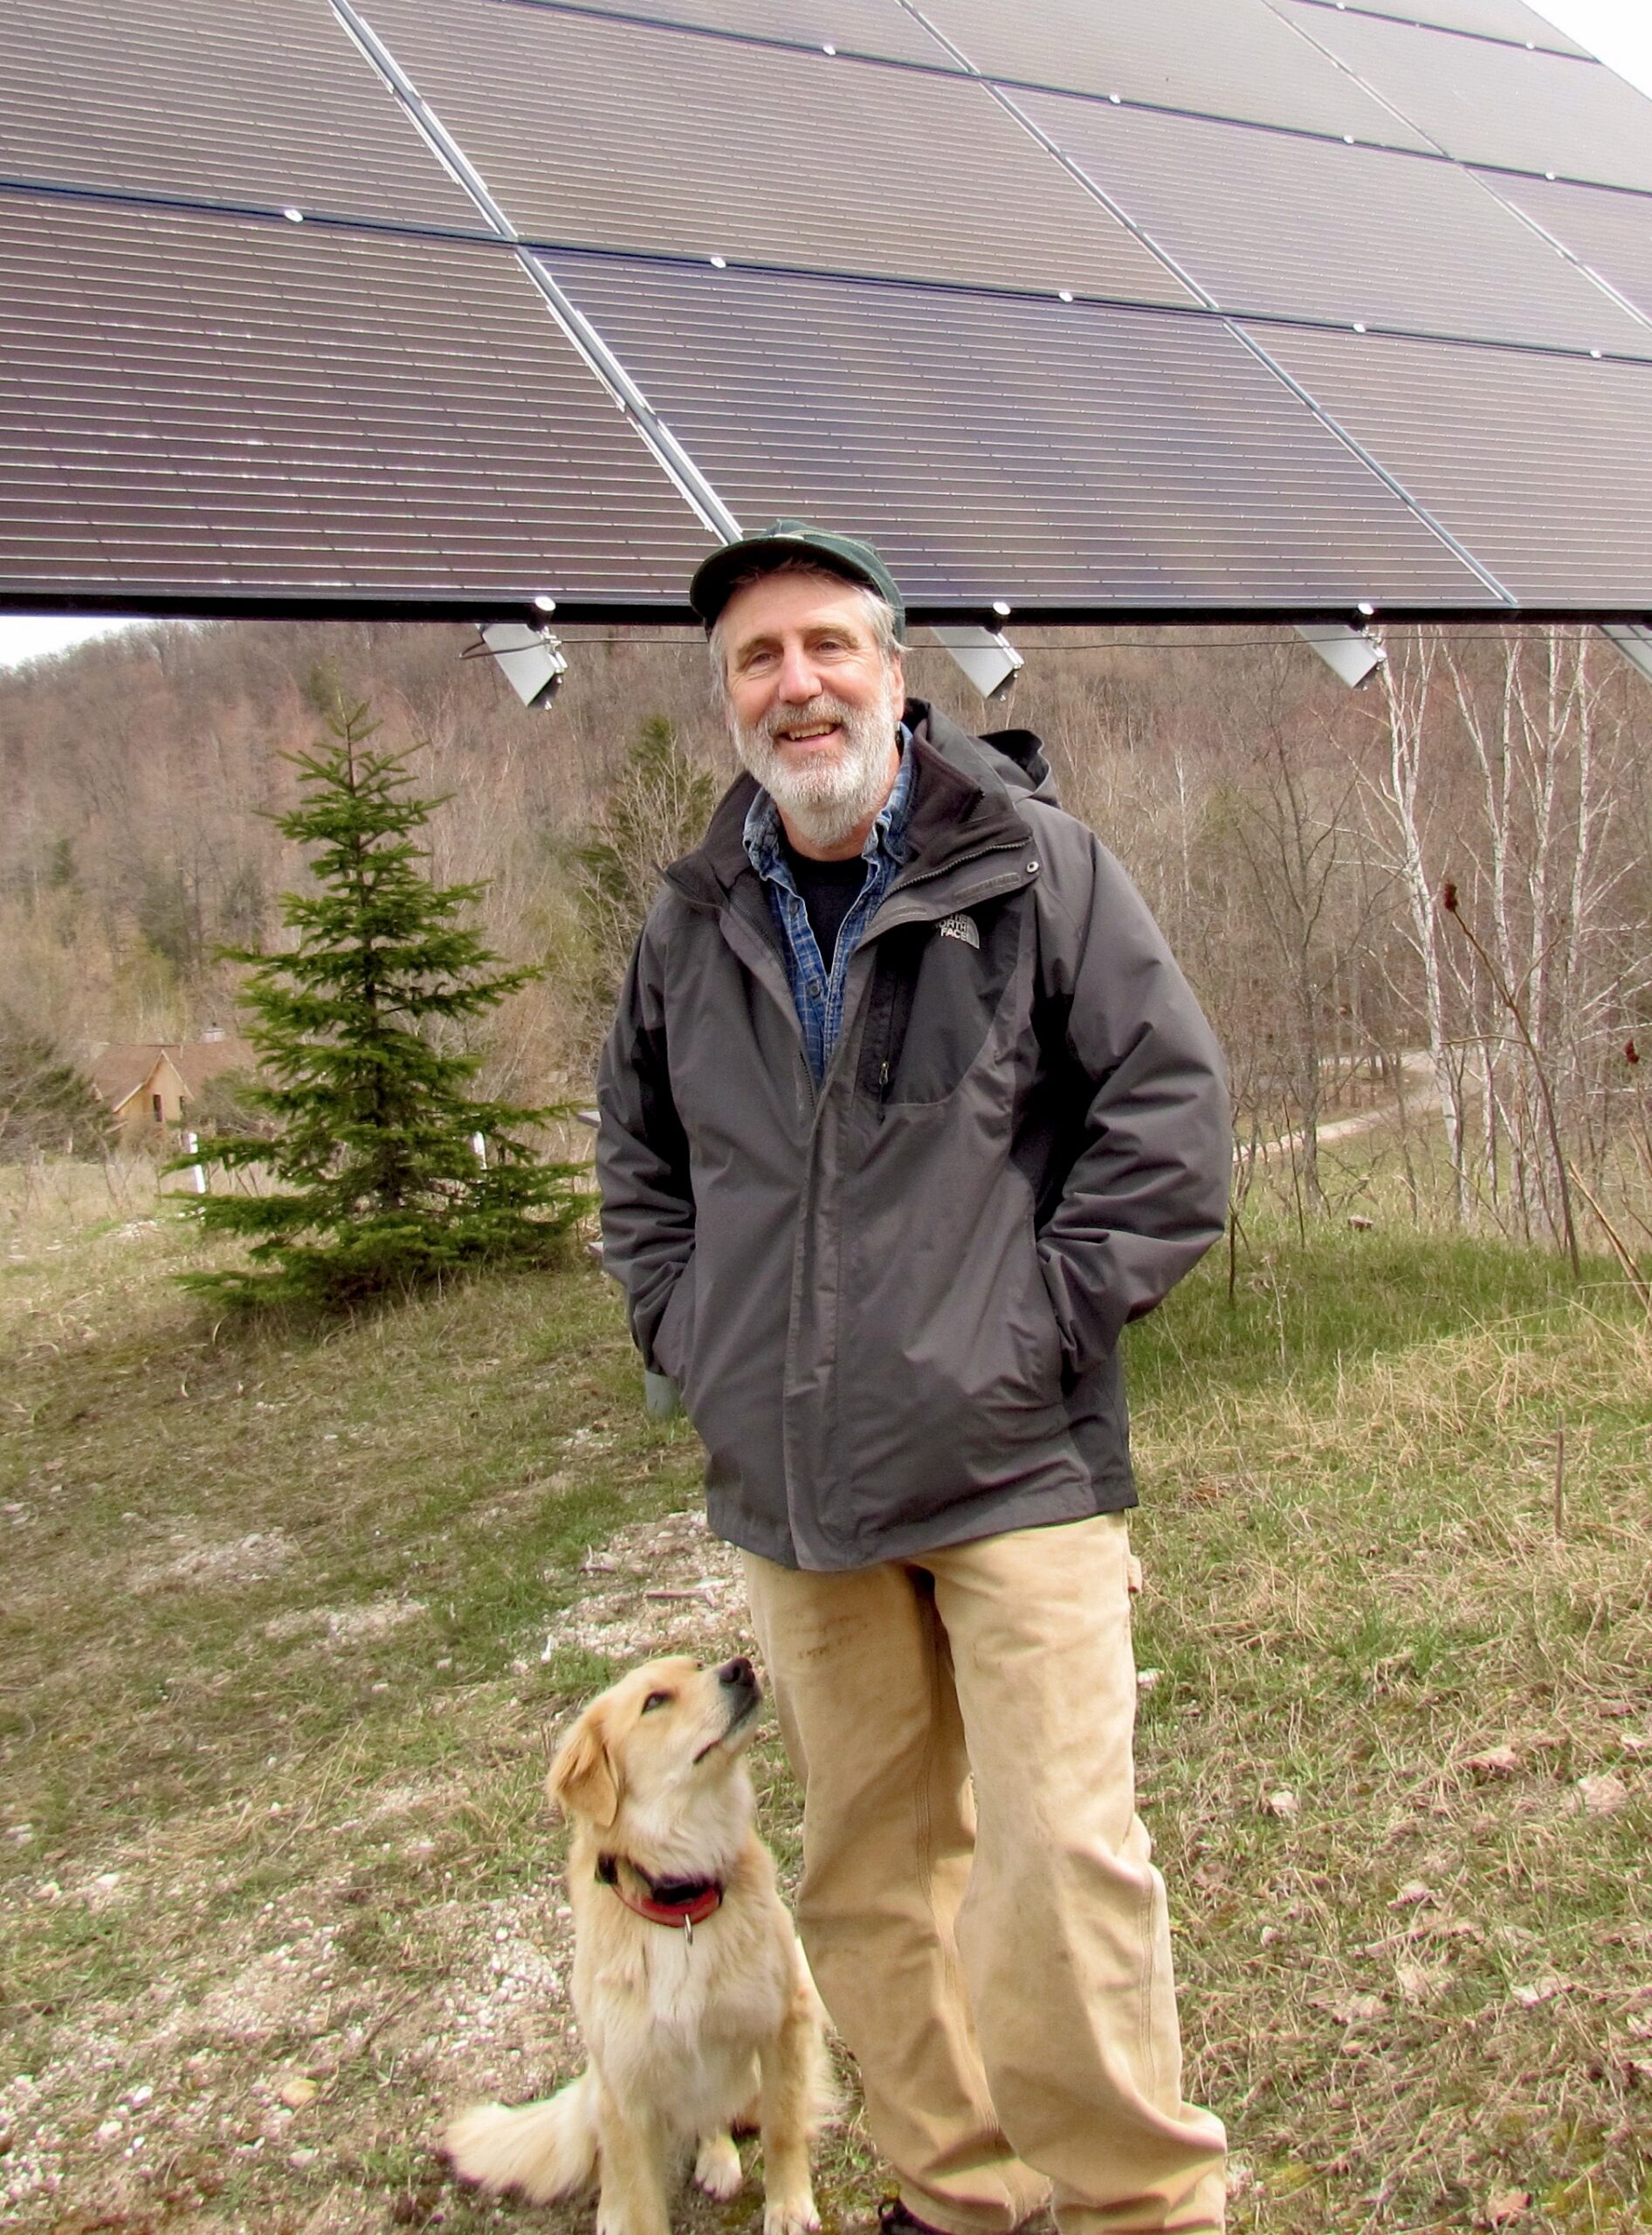 Jim Lively with dog and solar panel